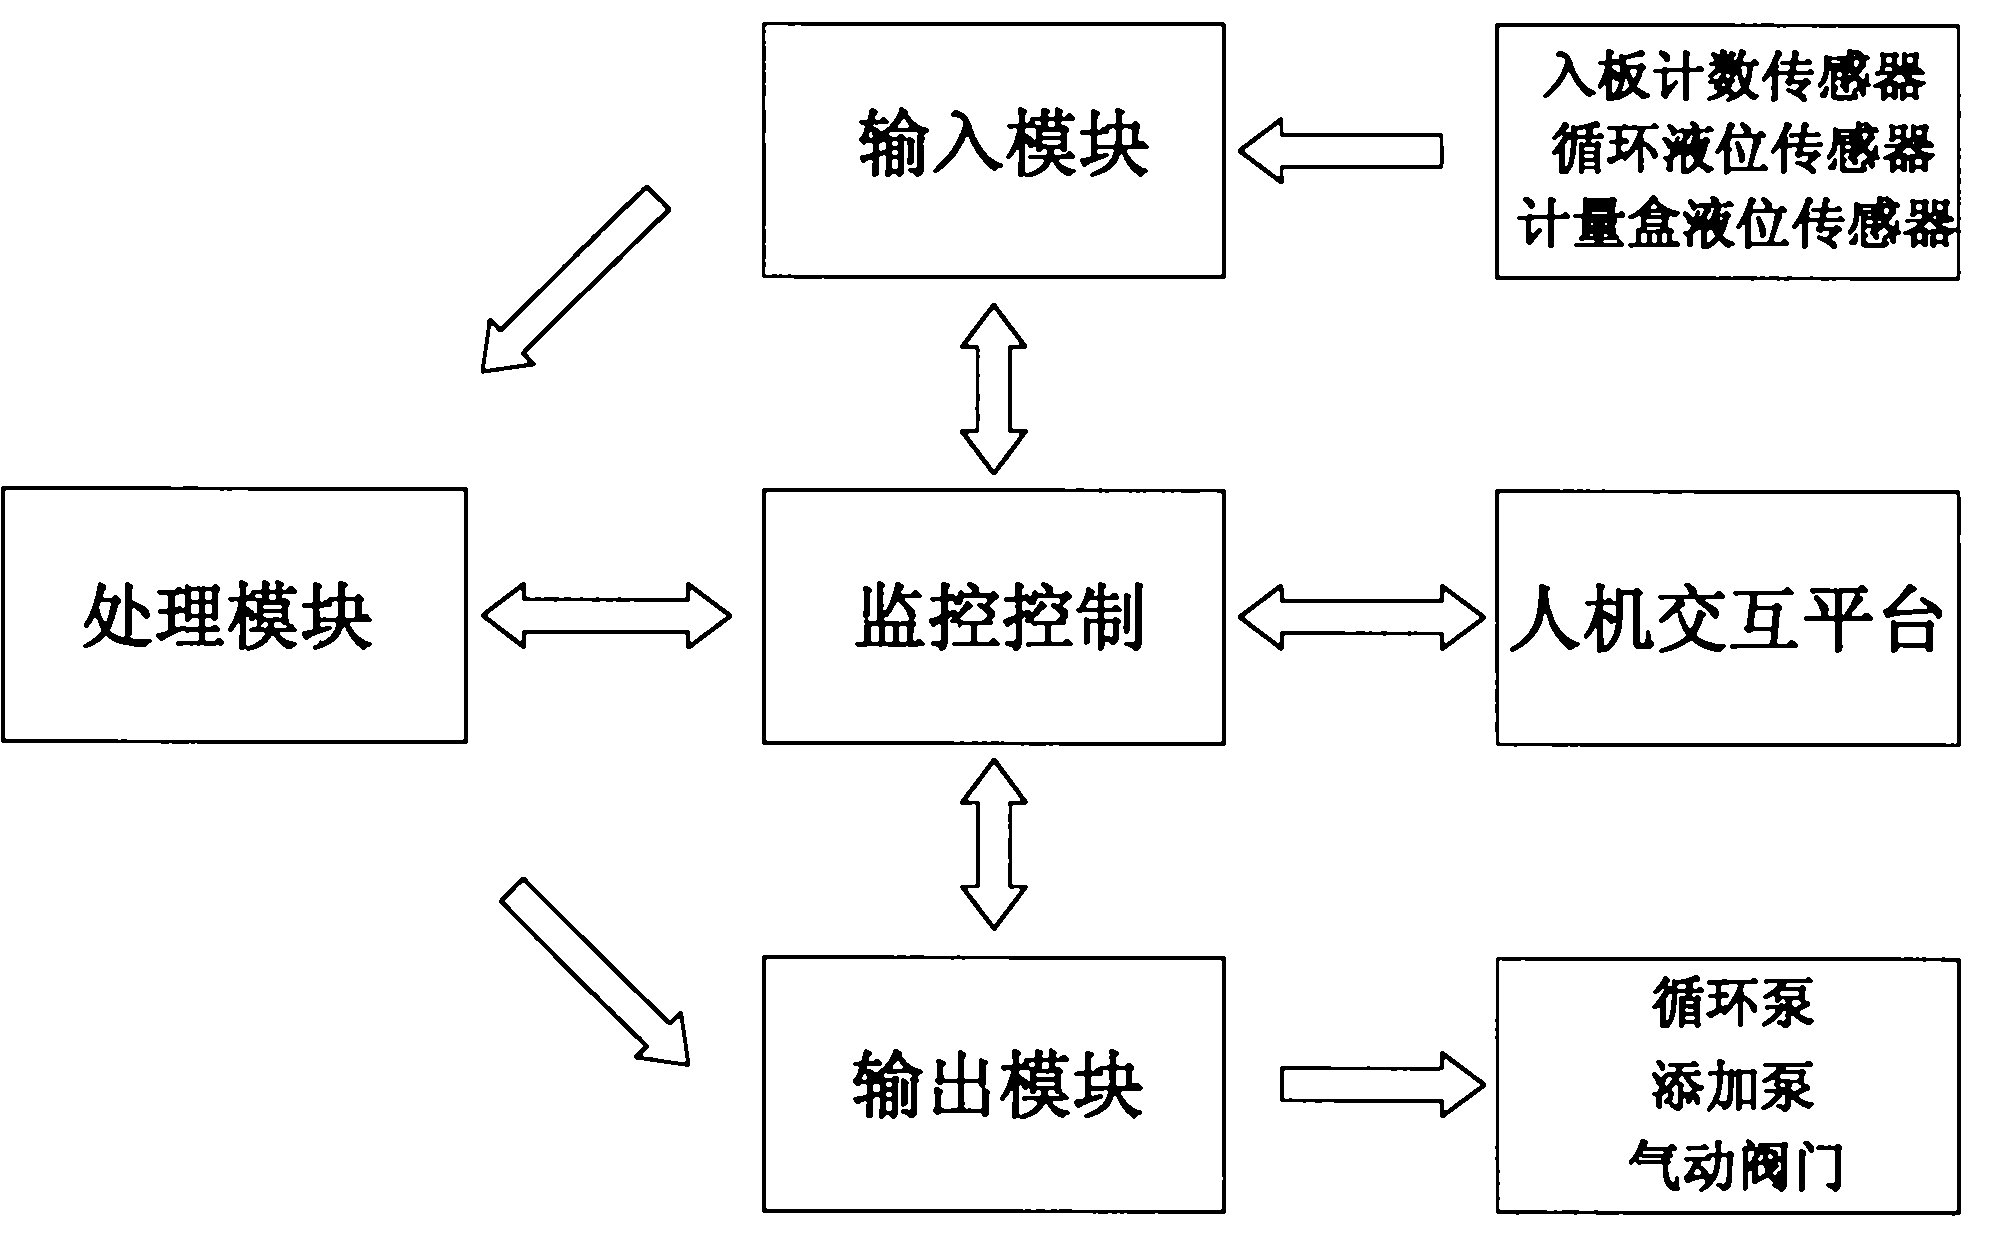 Automatic solution adding system